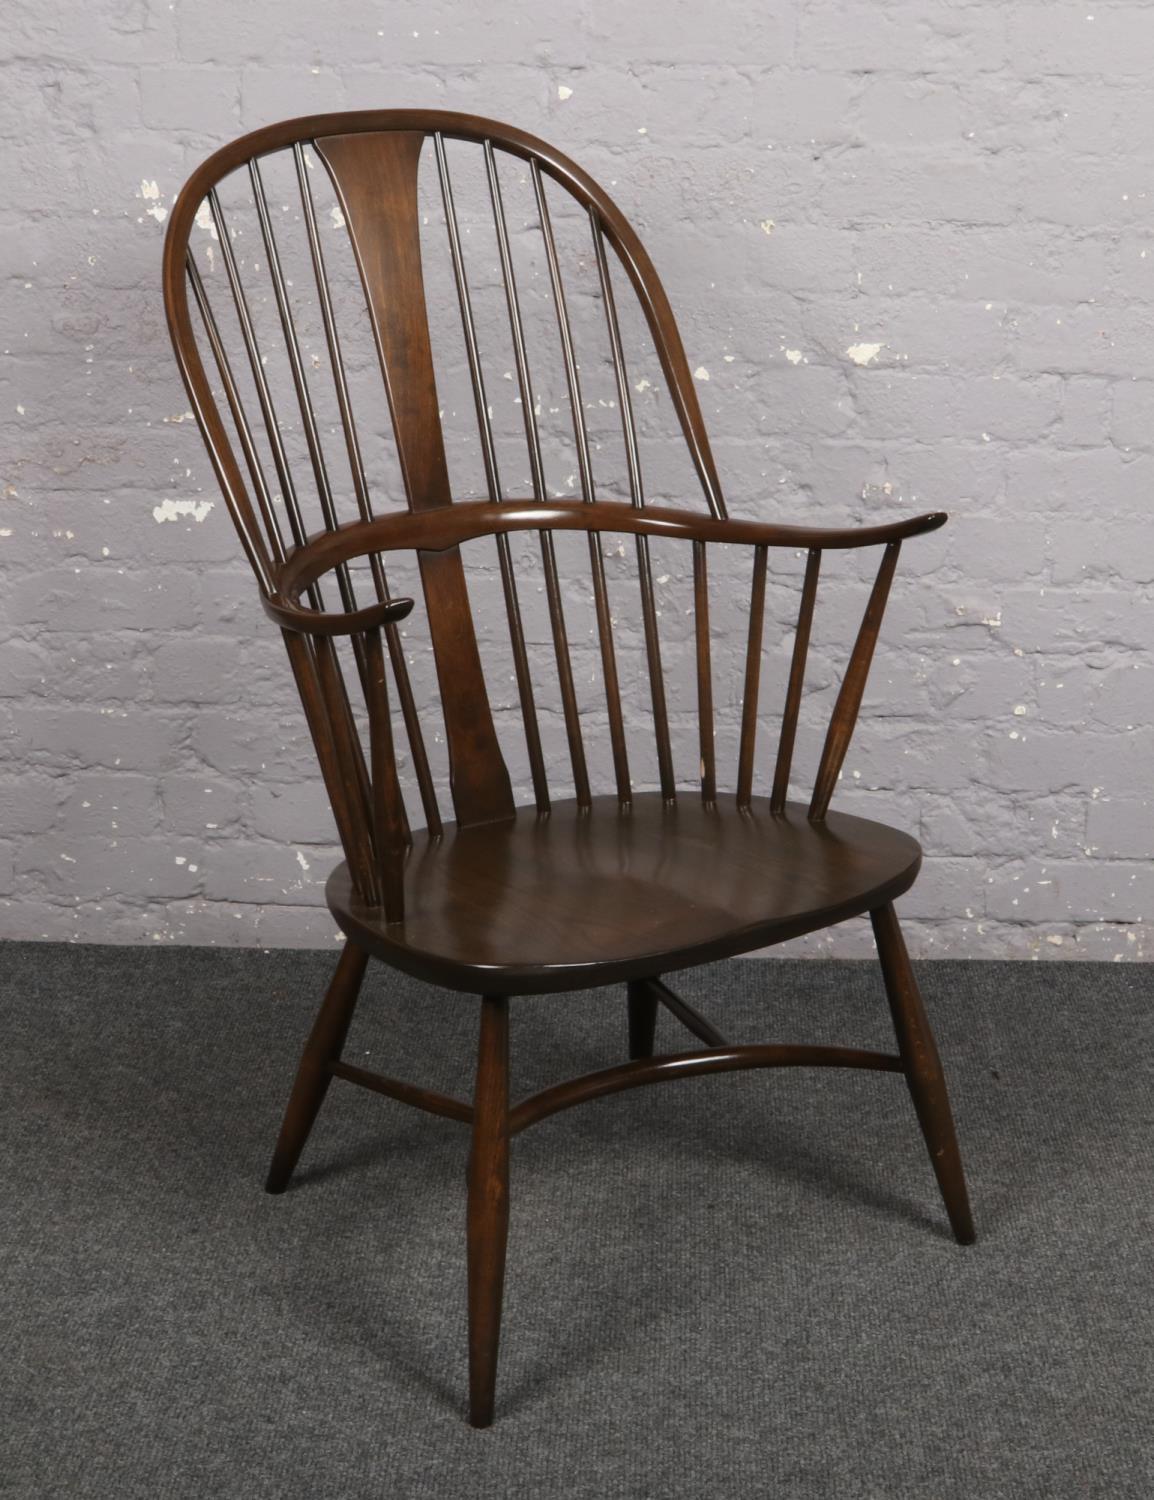 An Ercol Windsor arm chair with crinoline stretcher. Wear to one spindle. Slight wear to arm.